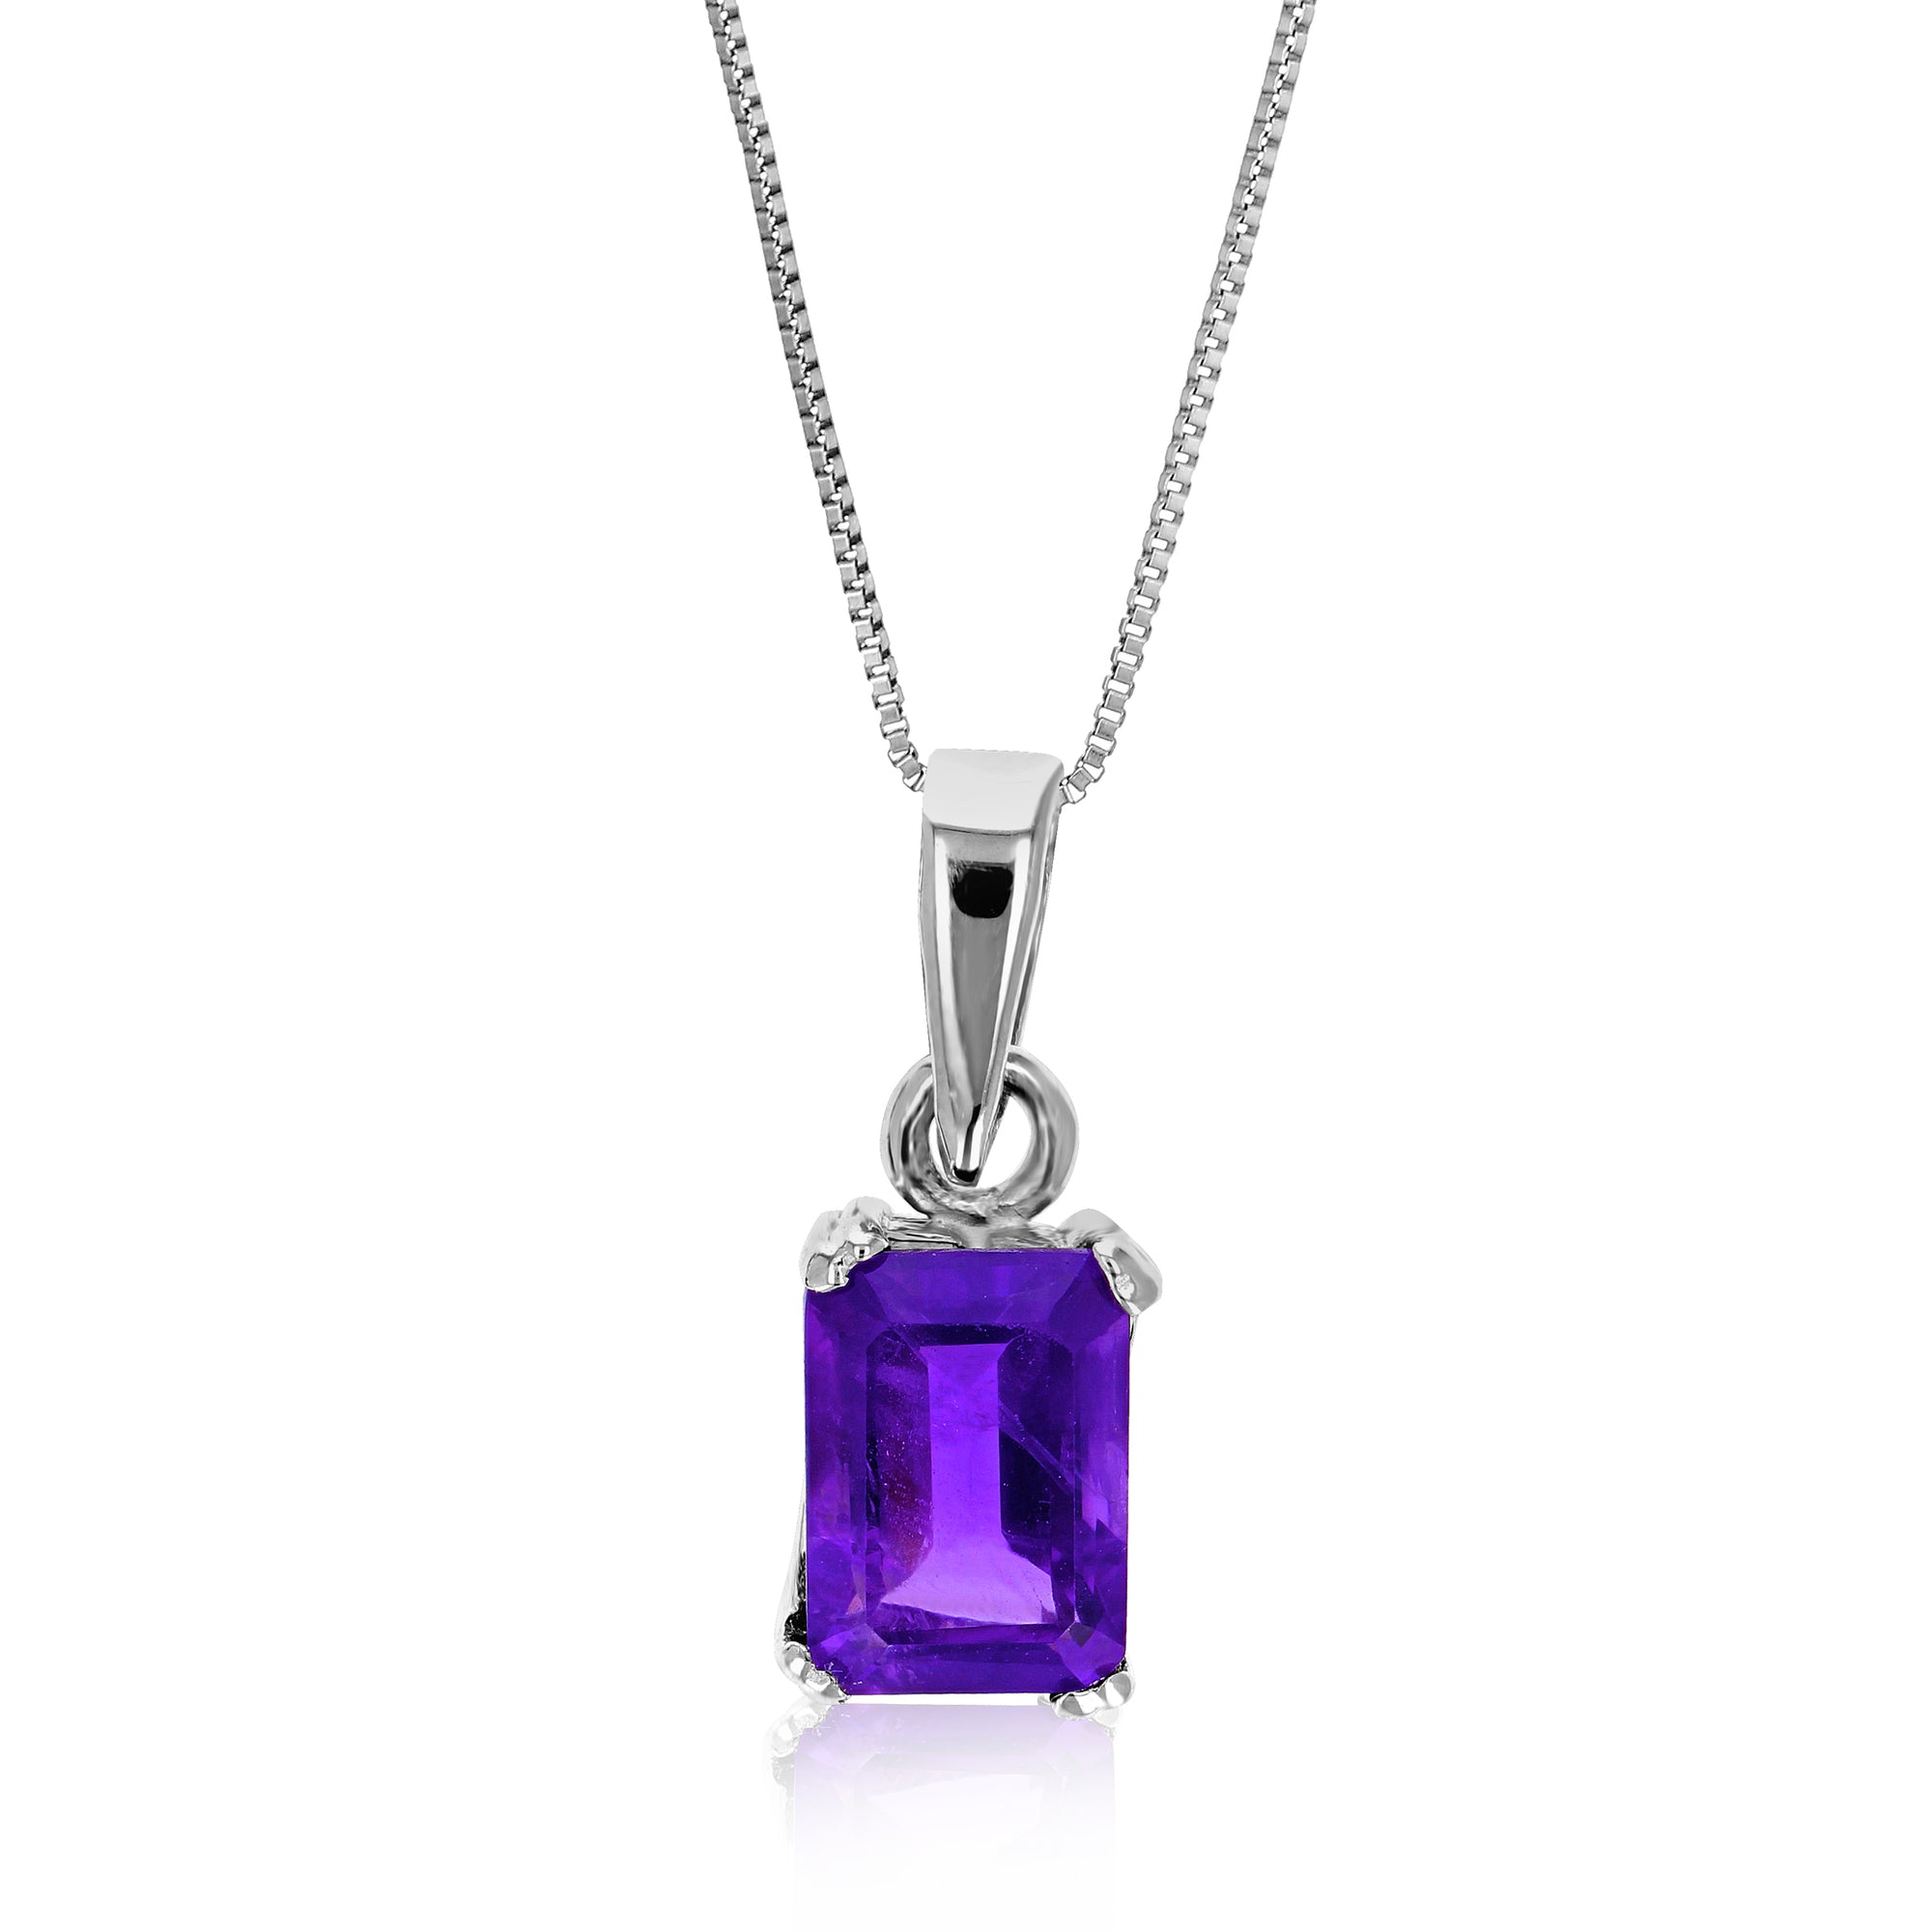 1 cttw Pendant Necklace, Purple Amethyst Emerald Shape Pendant Necklace for Women in .925 Sterling Silver with Rhodium, 18 Inch Chain, Prong Setting